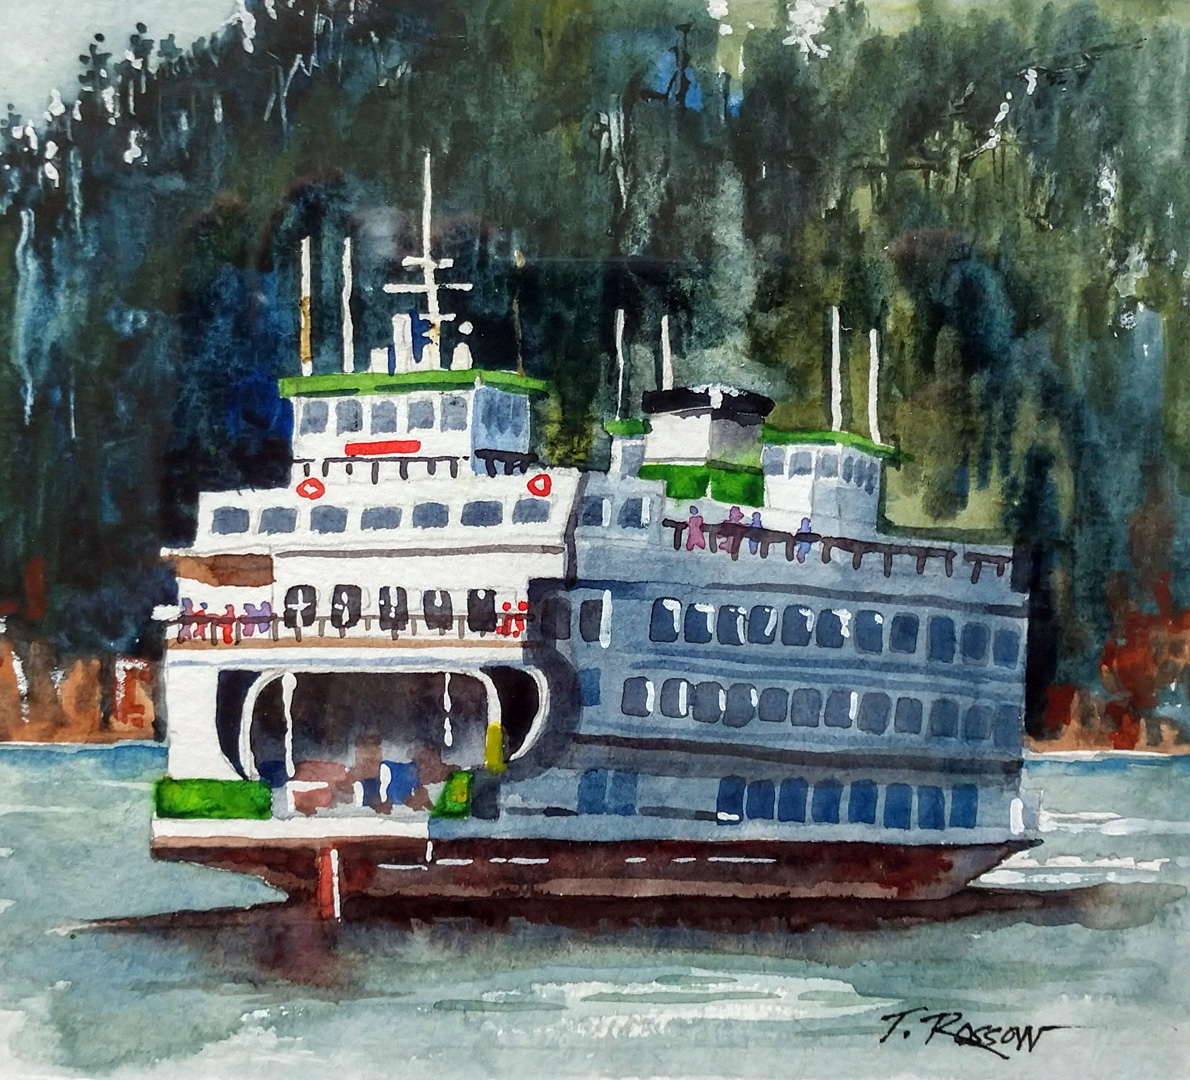 Washington State Ferry, Watercolor on paper, 7 x 6